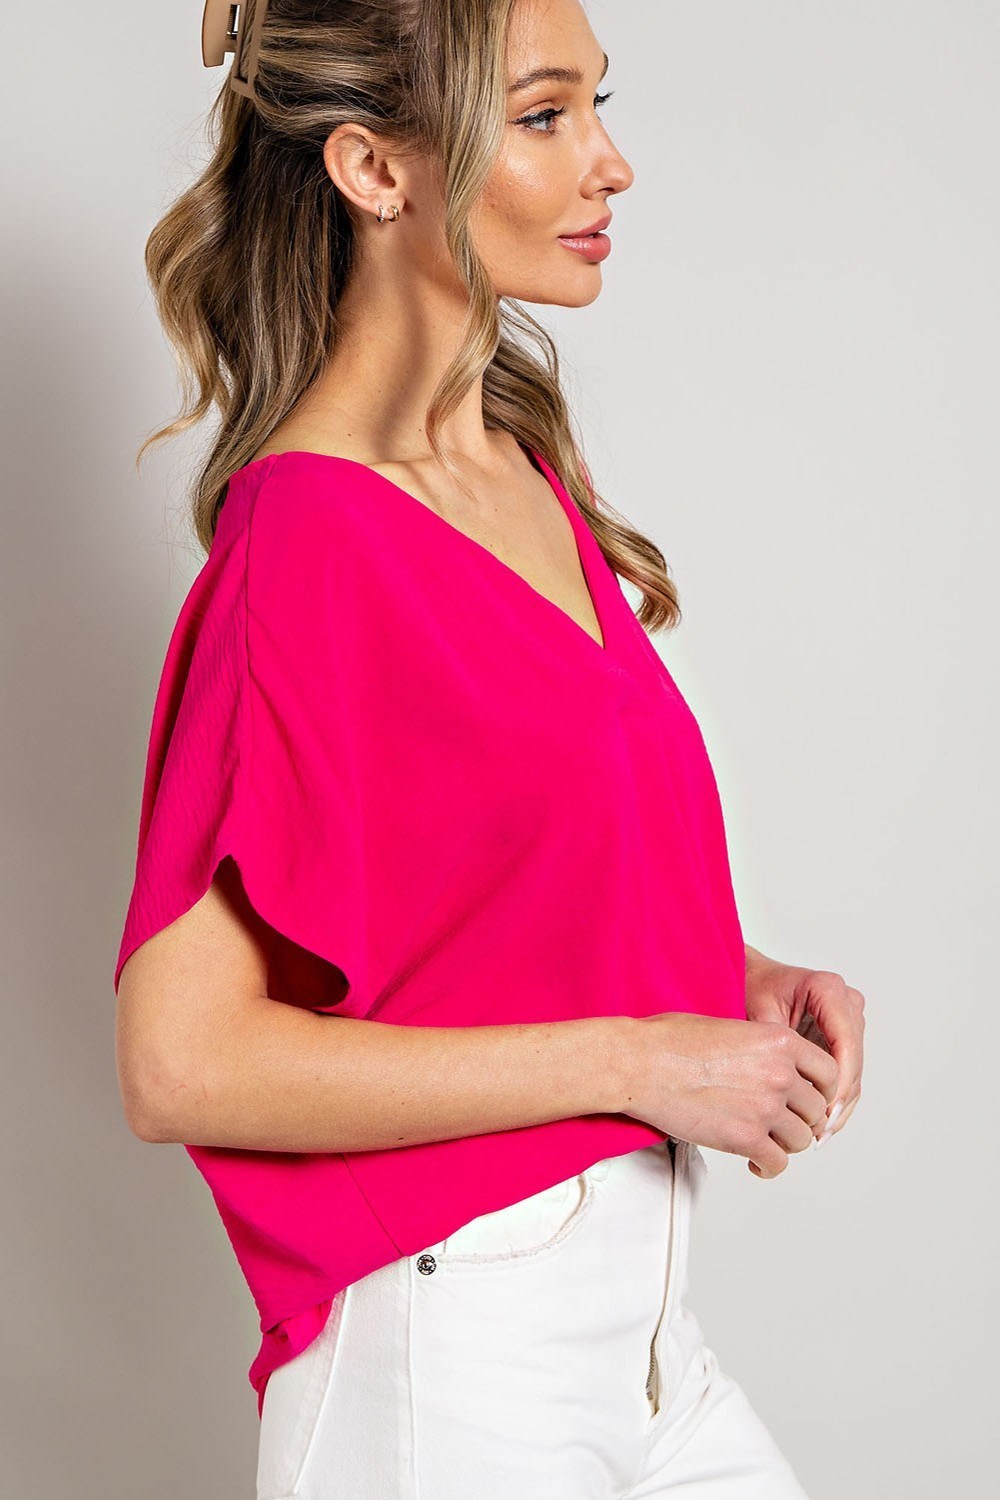 The Pink Pleat Blouse